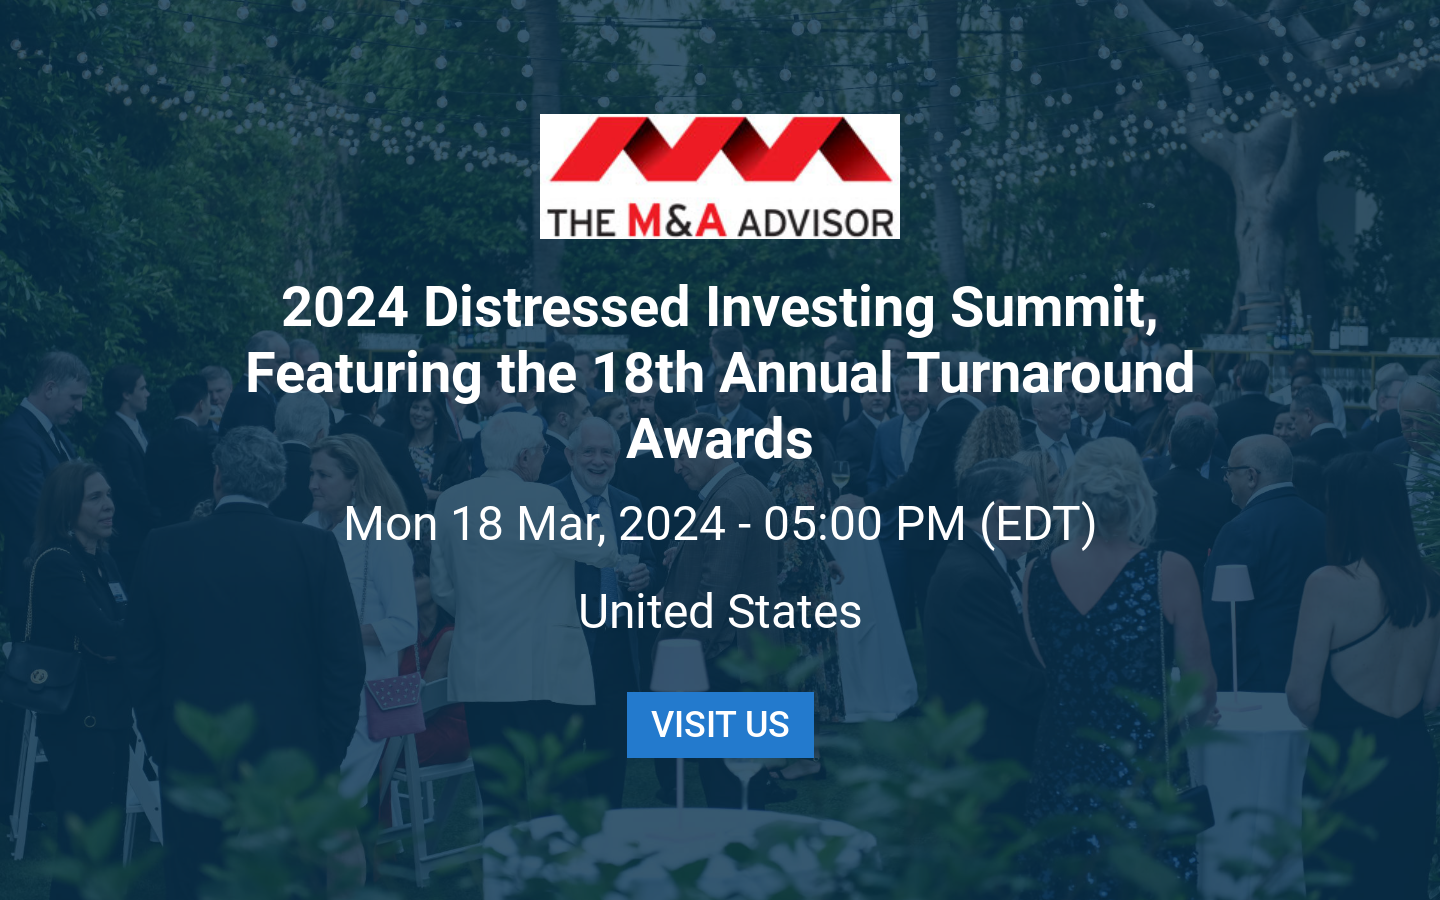 2024 Distressed Investing Summit, Featuring the 18th Annual Turnaround